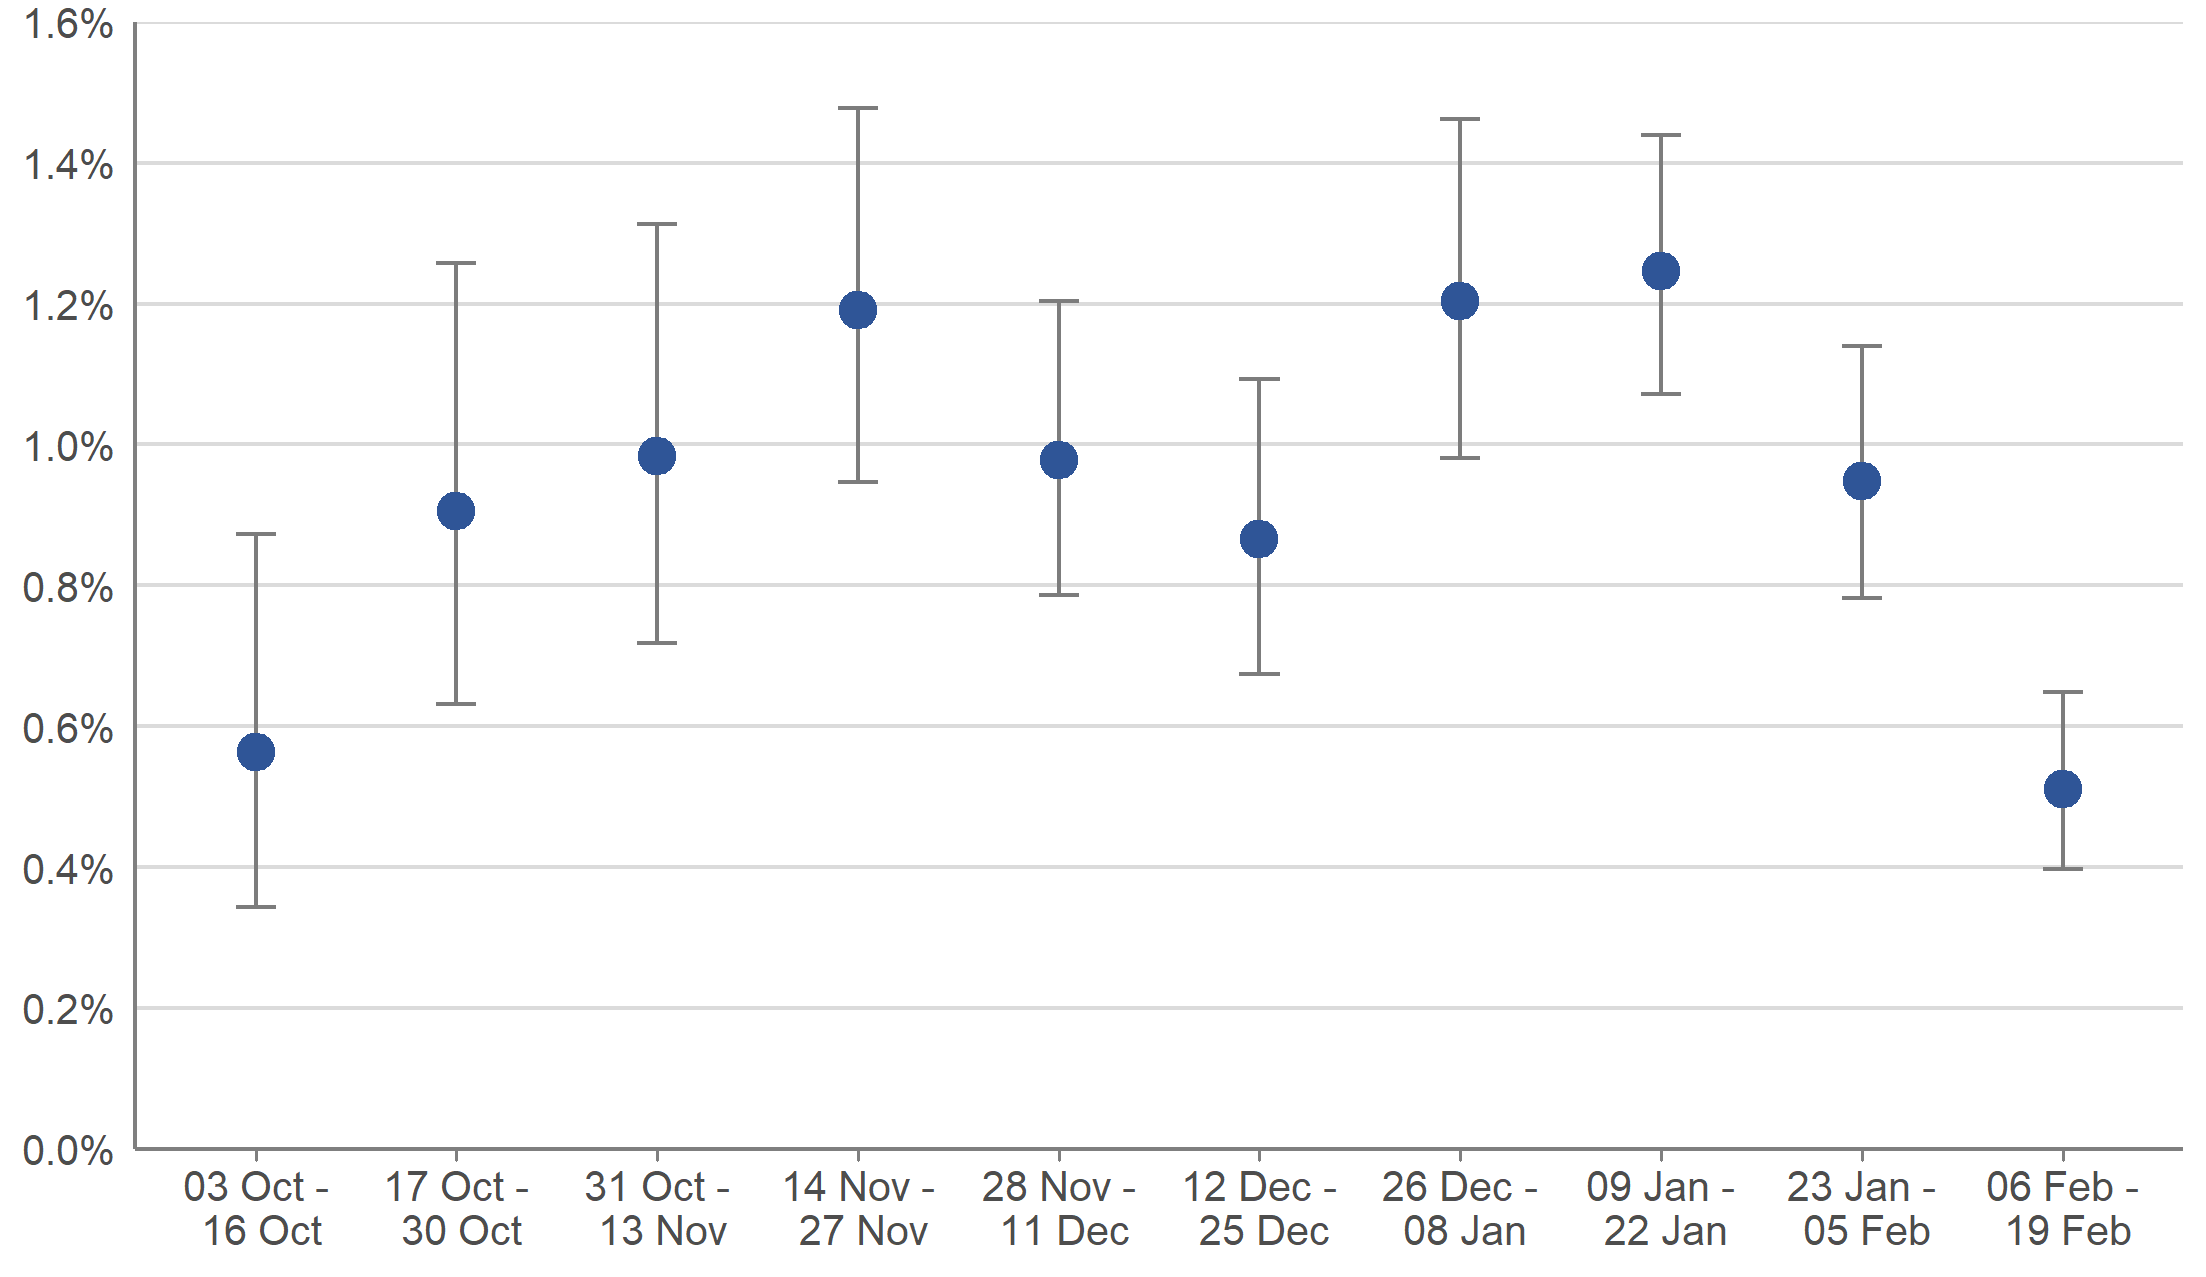 Weighted estimates of the percentage of the population that would have tested positive for COVID-19 between 3 October 2020 and 19 February 2021